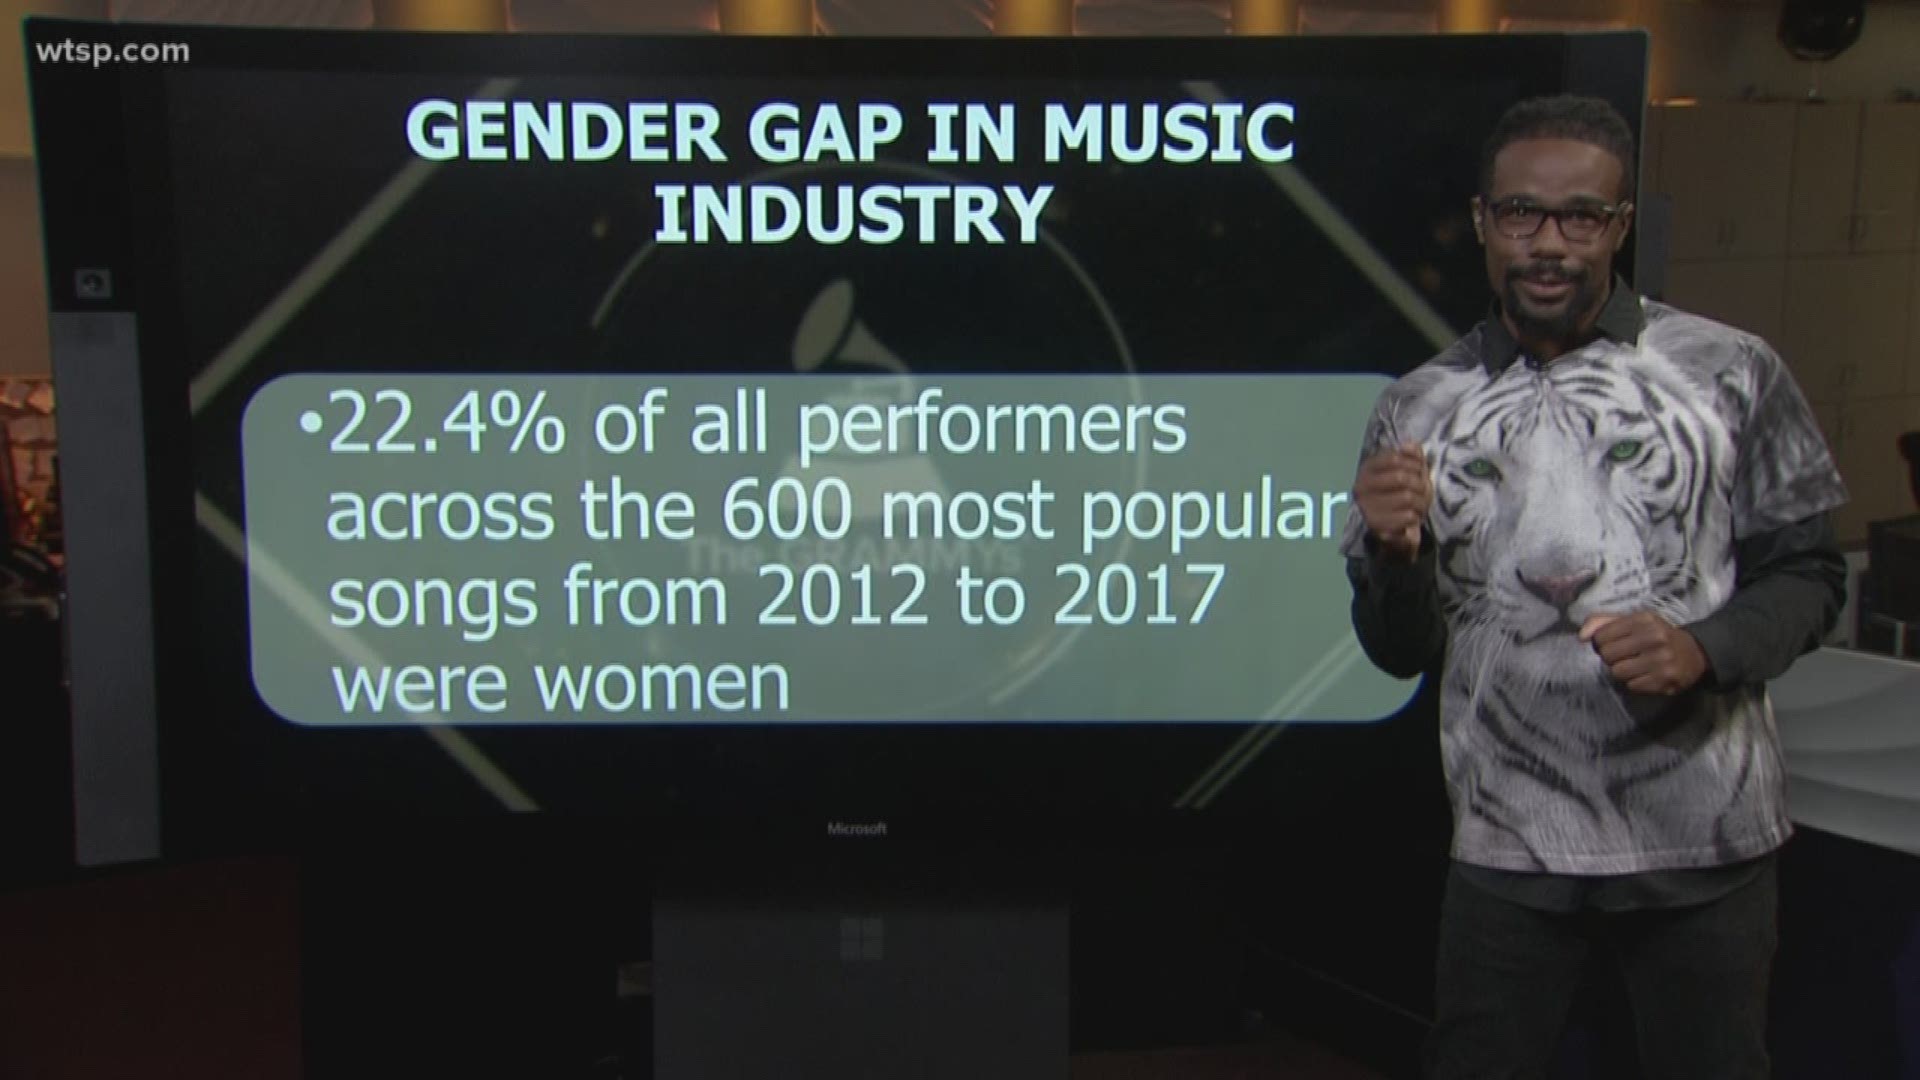 Of the 600 most popular songs from 2012 to 2017, only 22 percent of all performers were women.